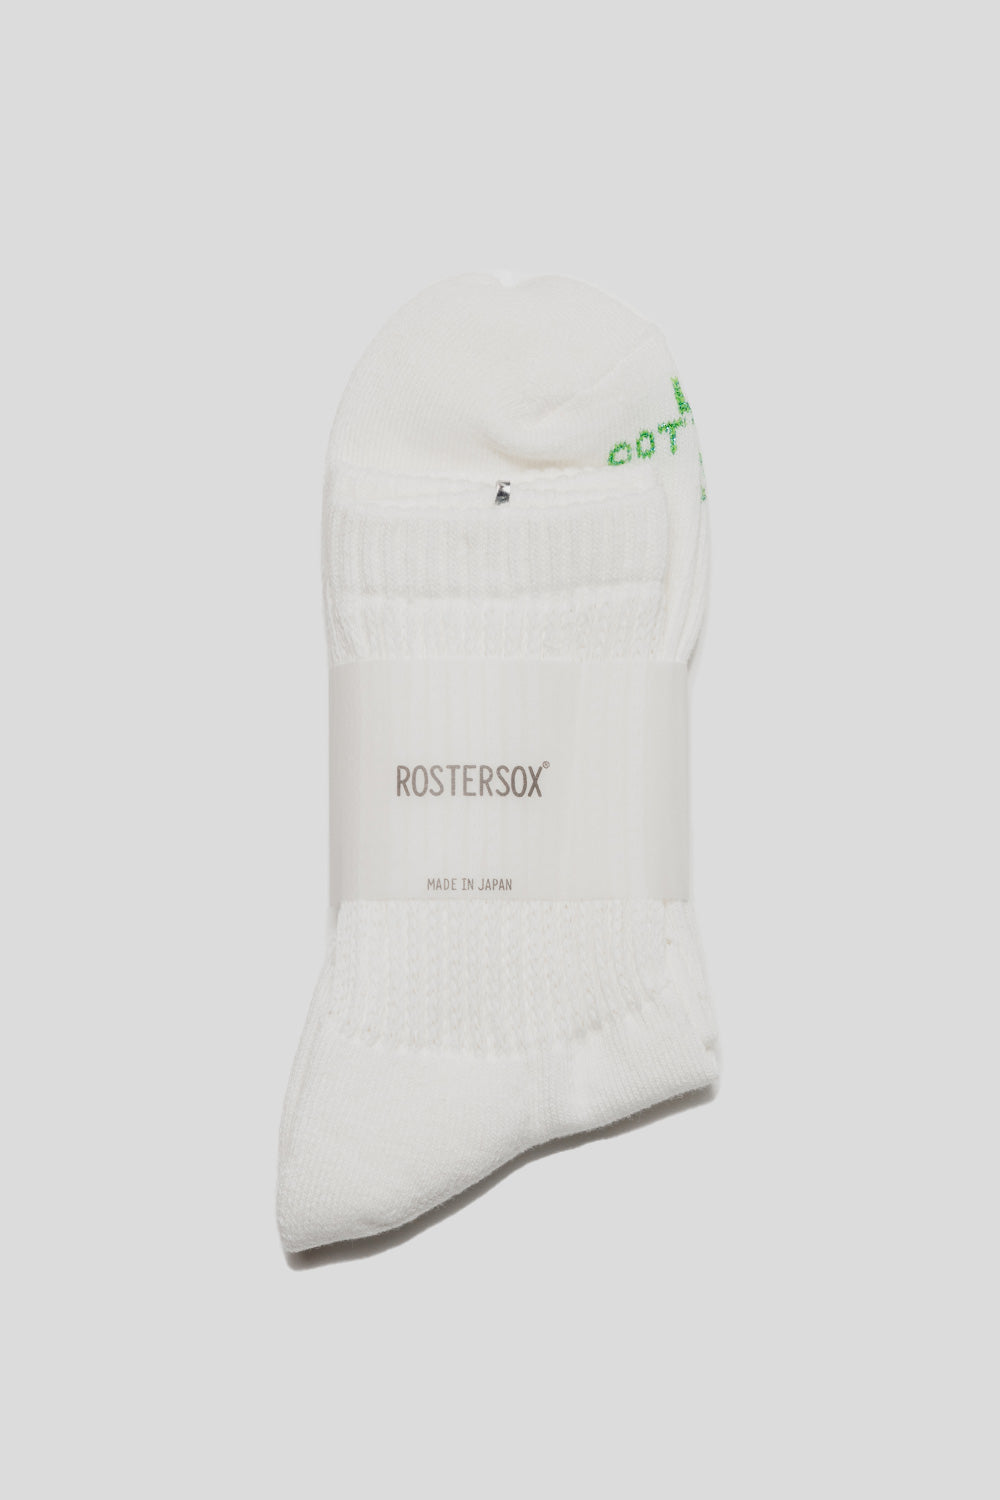 Rostersox Linen and Cotton Socks in White